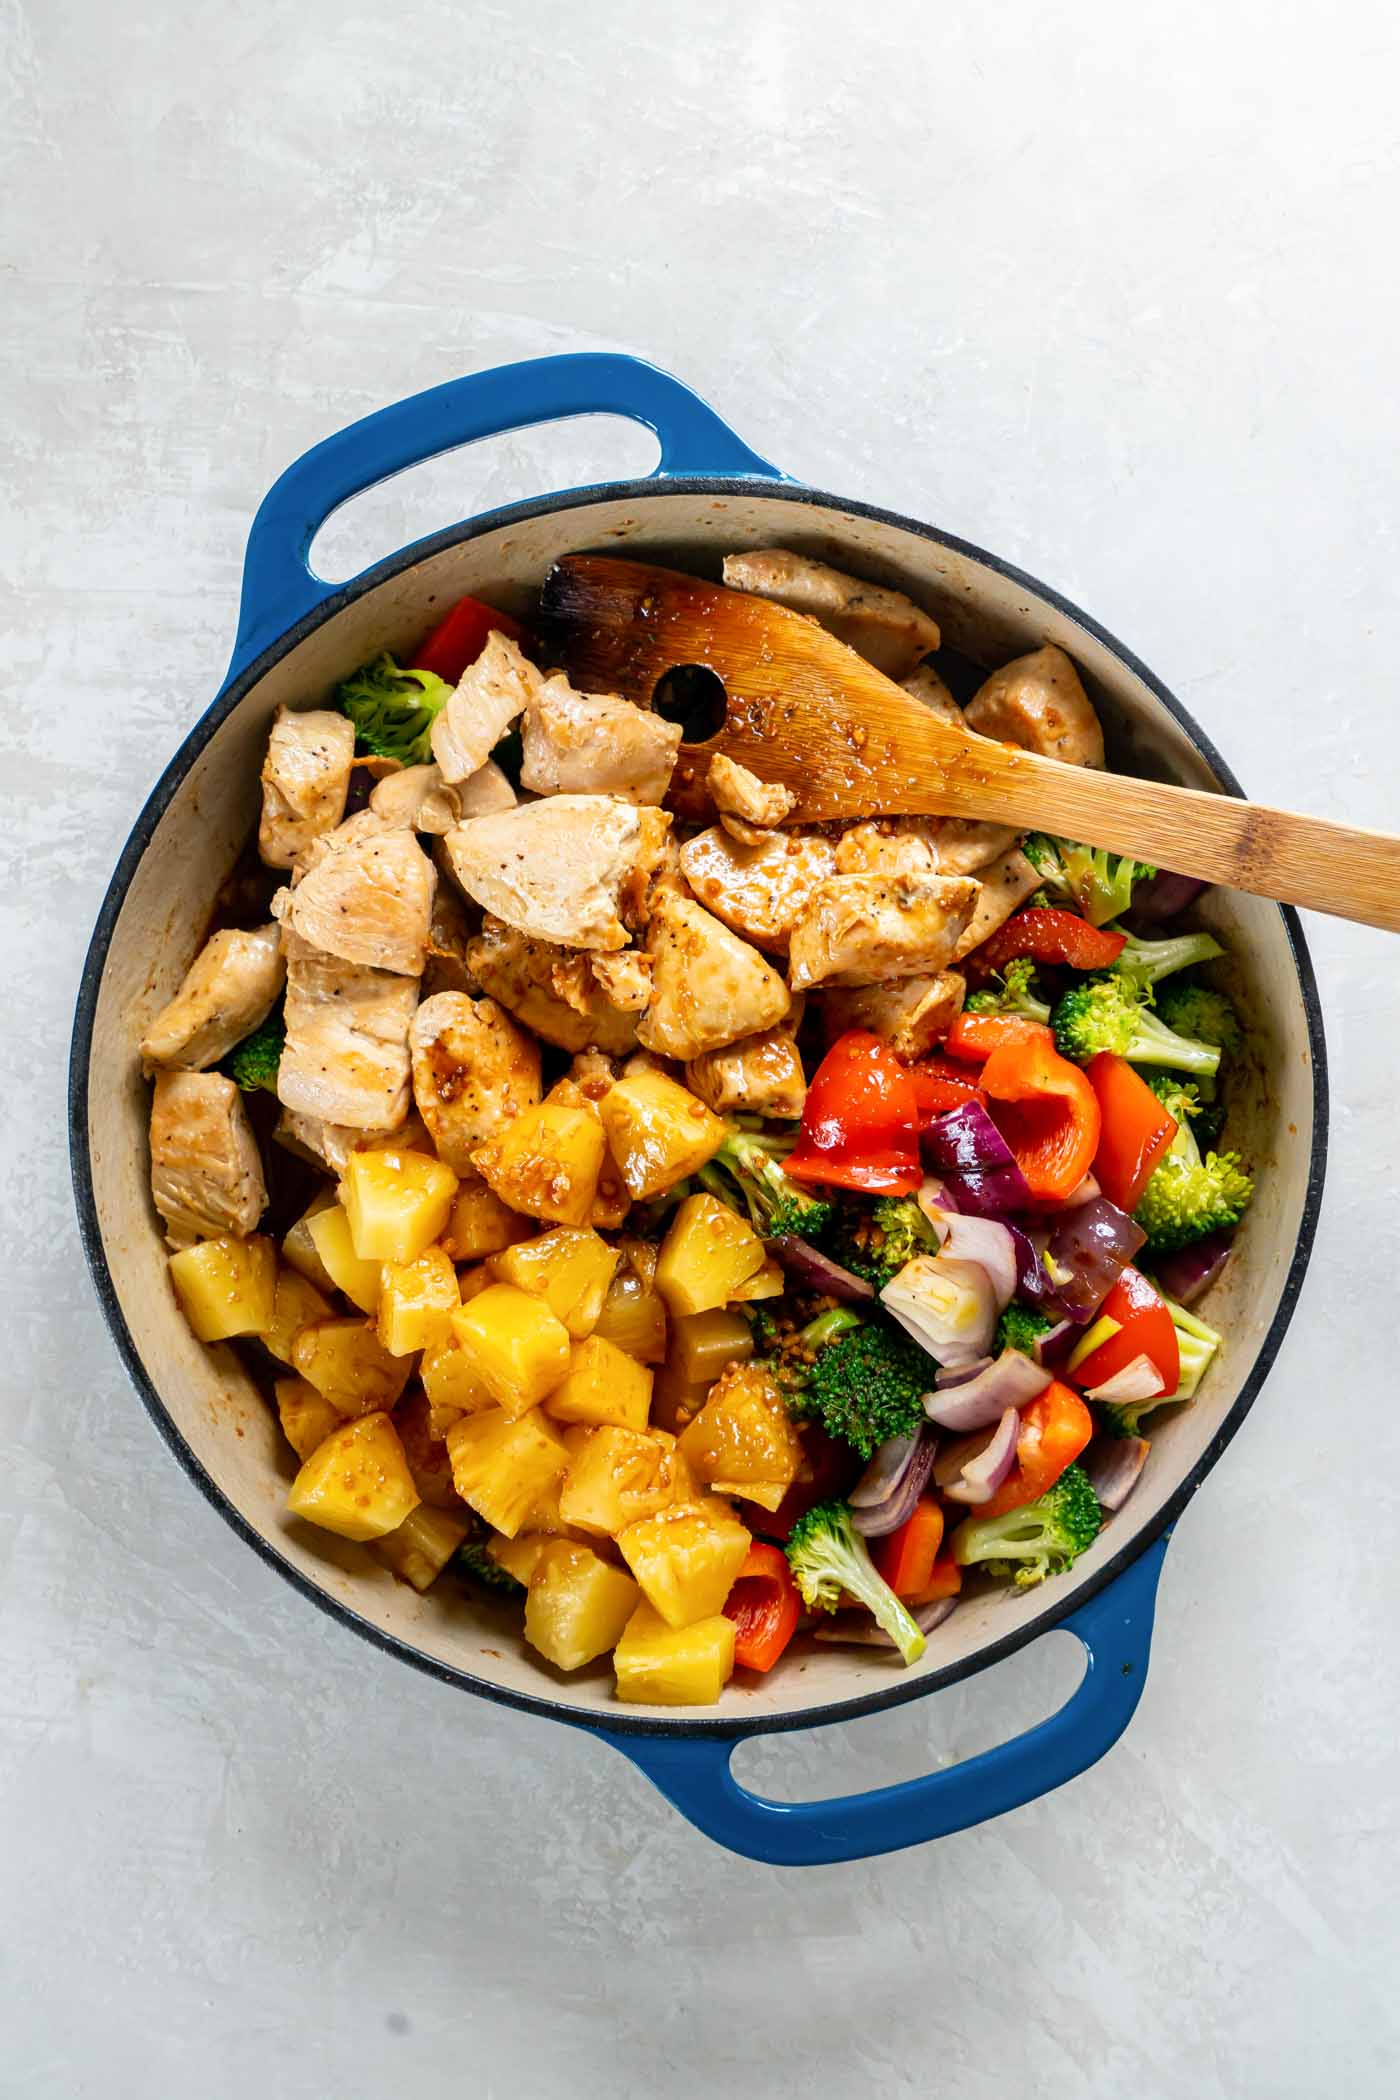 Chicken, pineapple and teriyaki sauce added to pan with vegetables.